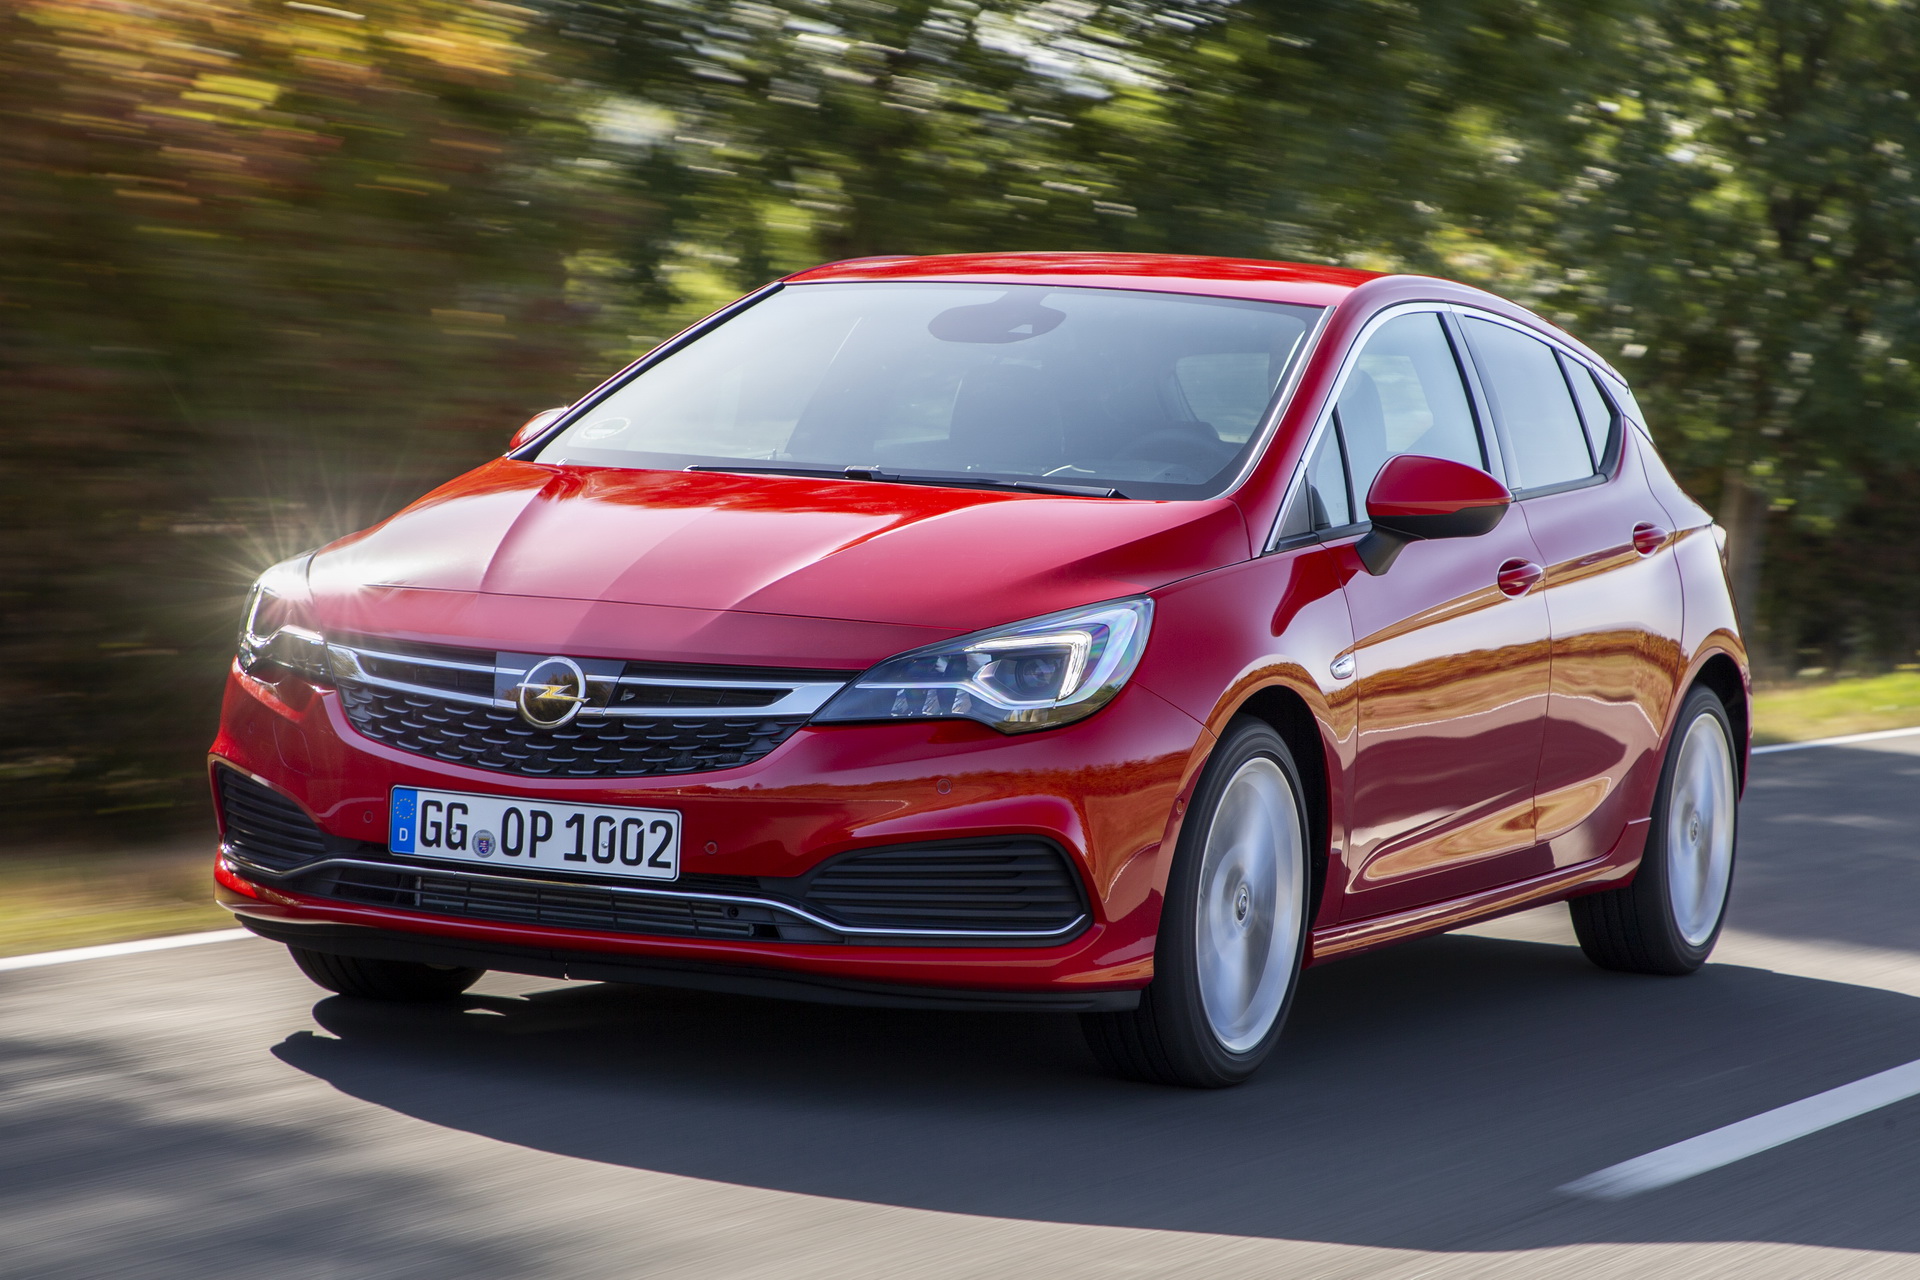 Opel Returns To Russia Thanks To Market Rebound, May Build Cars There ...